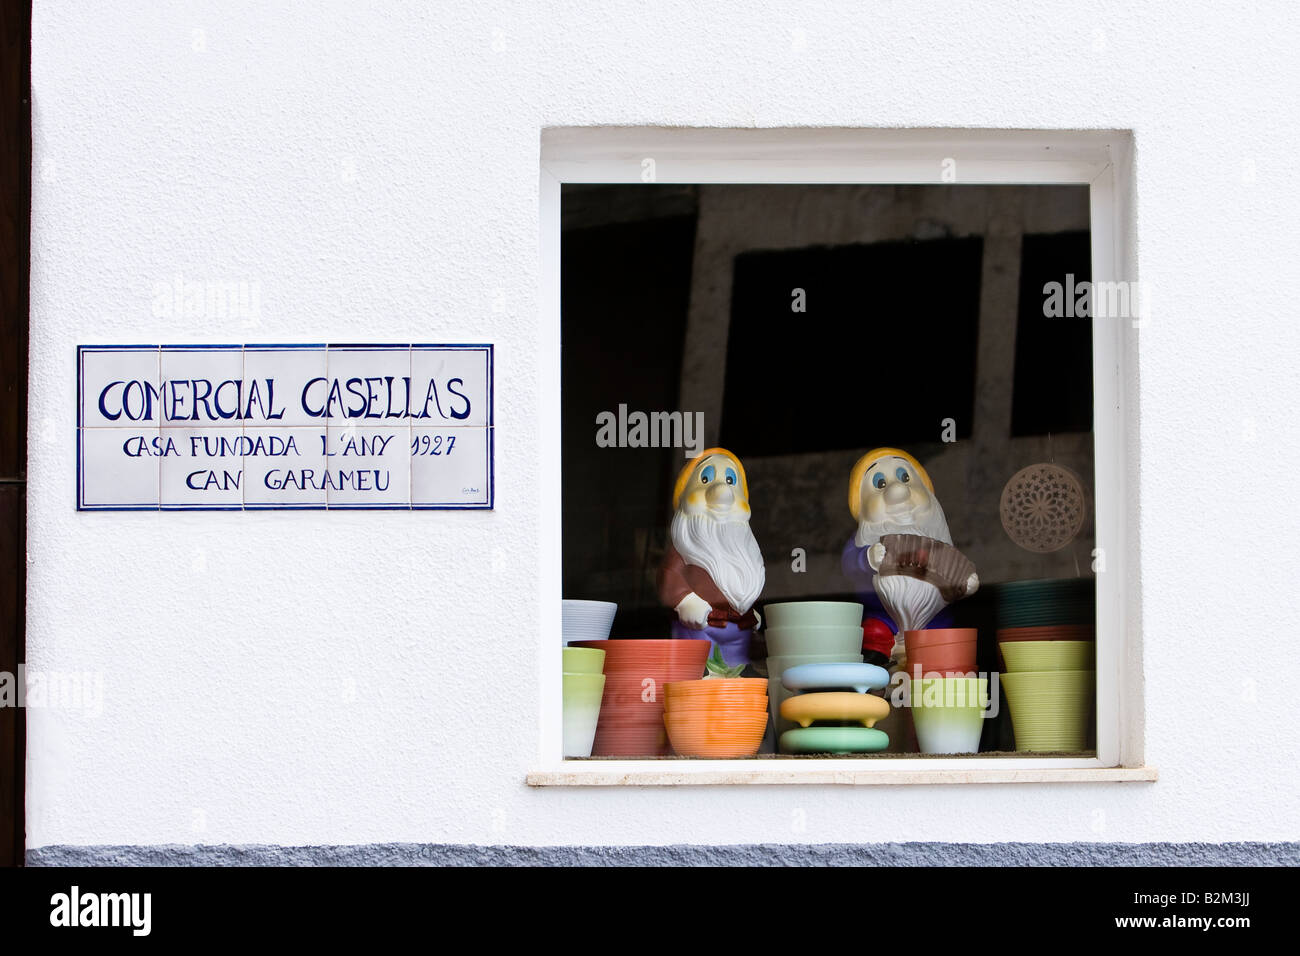 Two garden gnomes are seen in a shop window in Arna, Majorca, Spain Stock Photo